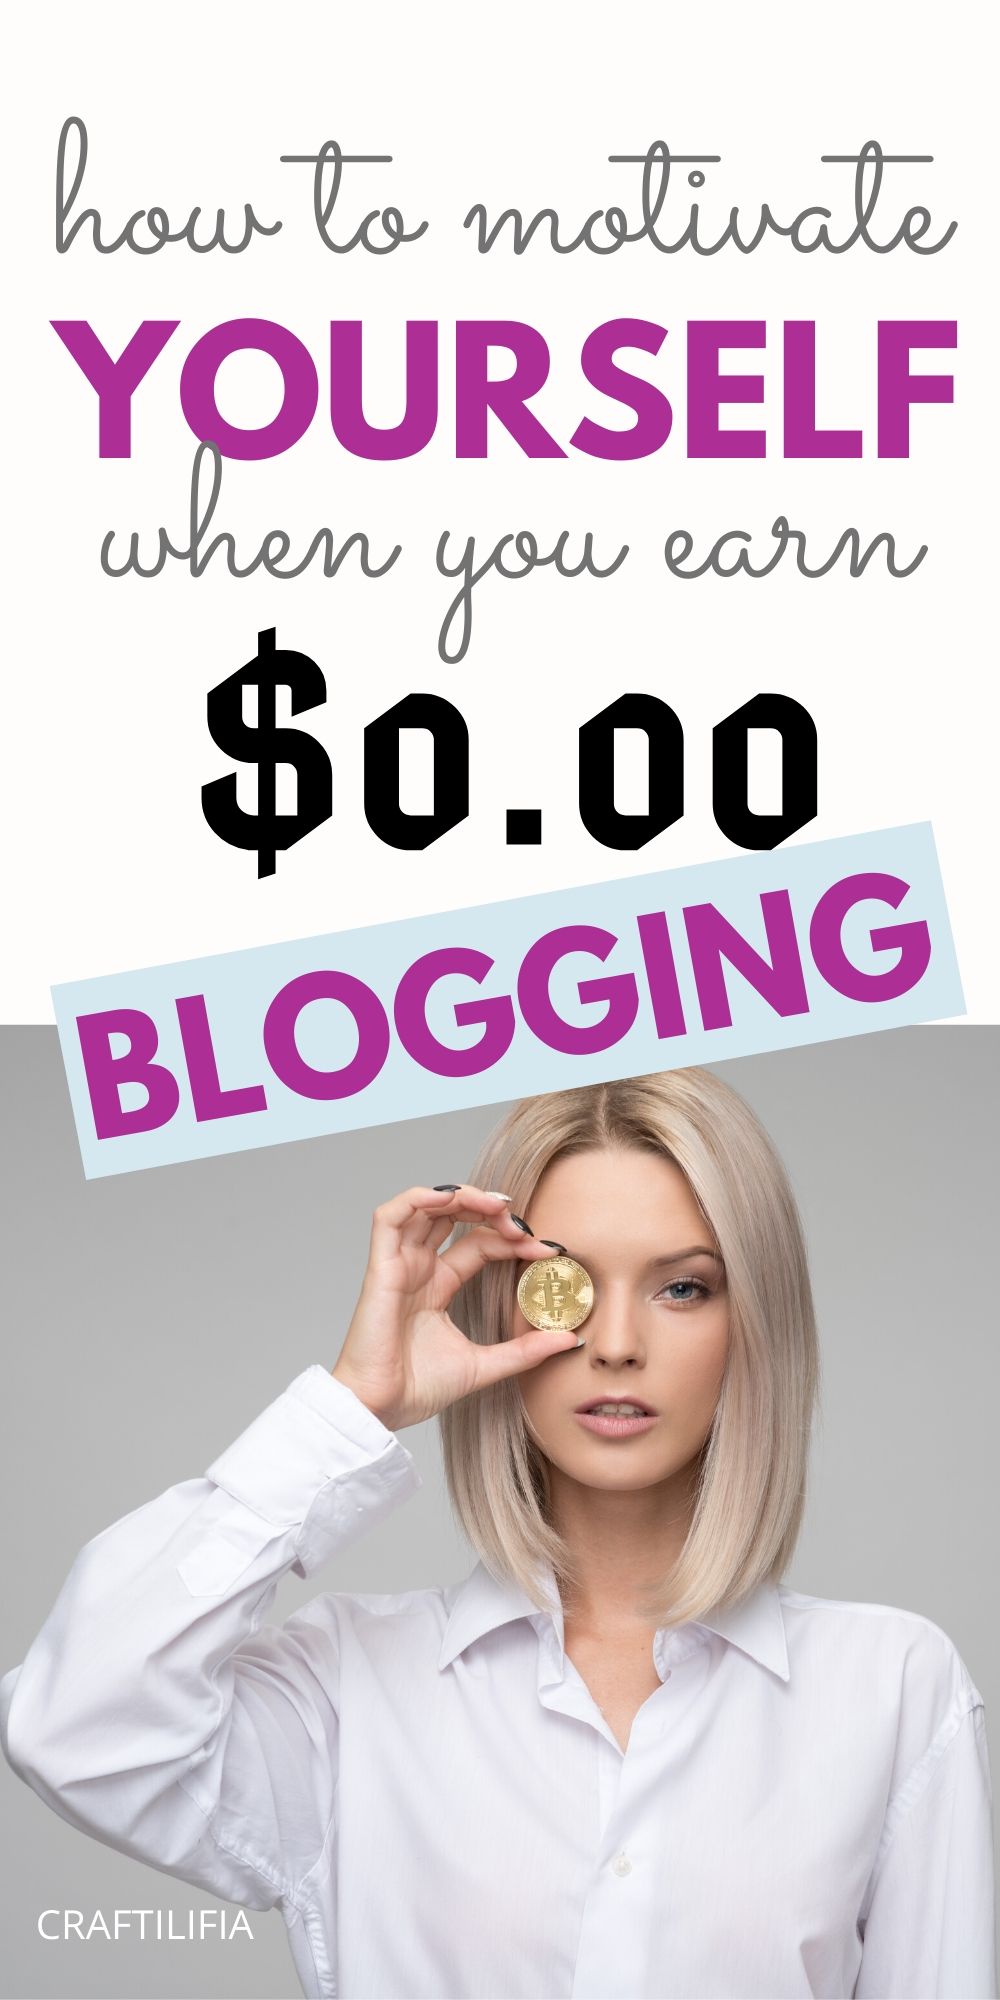 5 Tips to motivate you during the non earning period of blogging